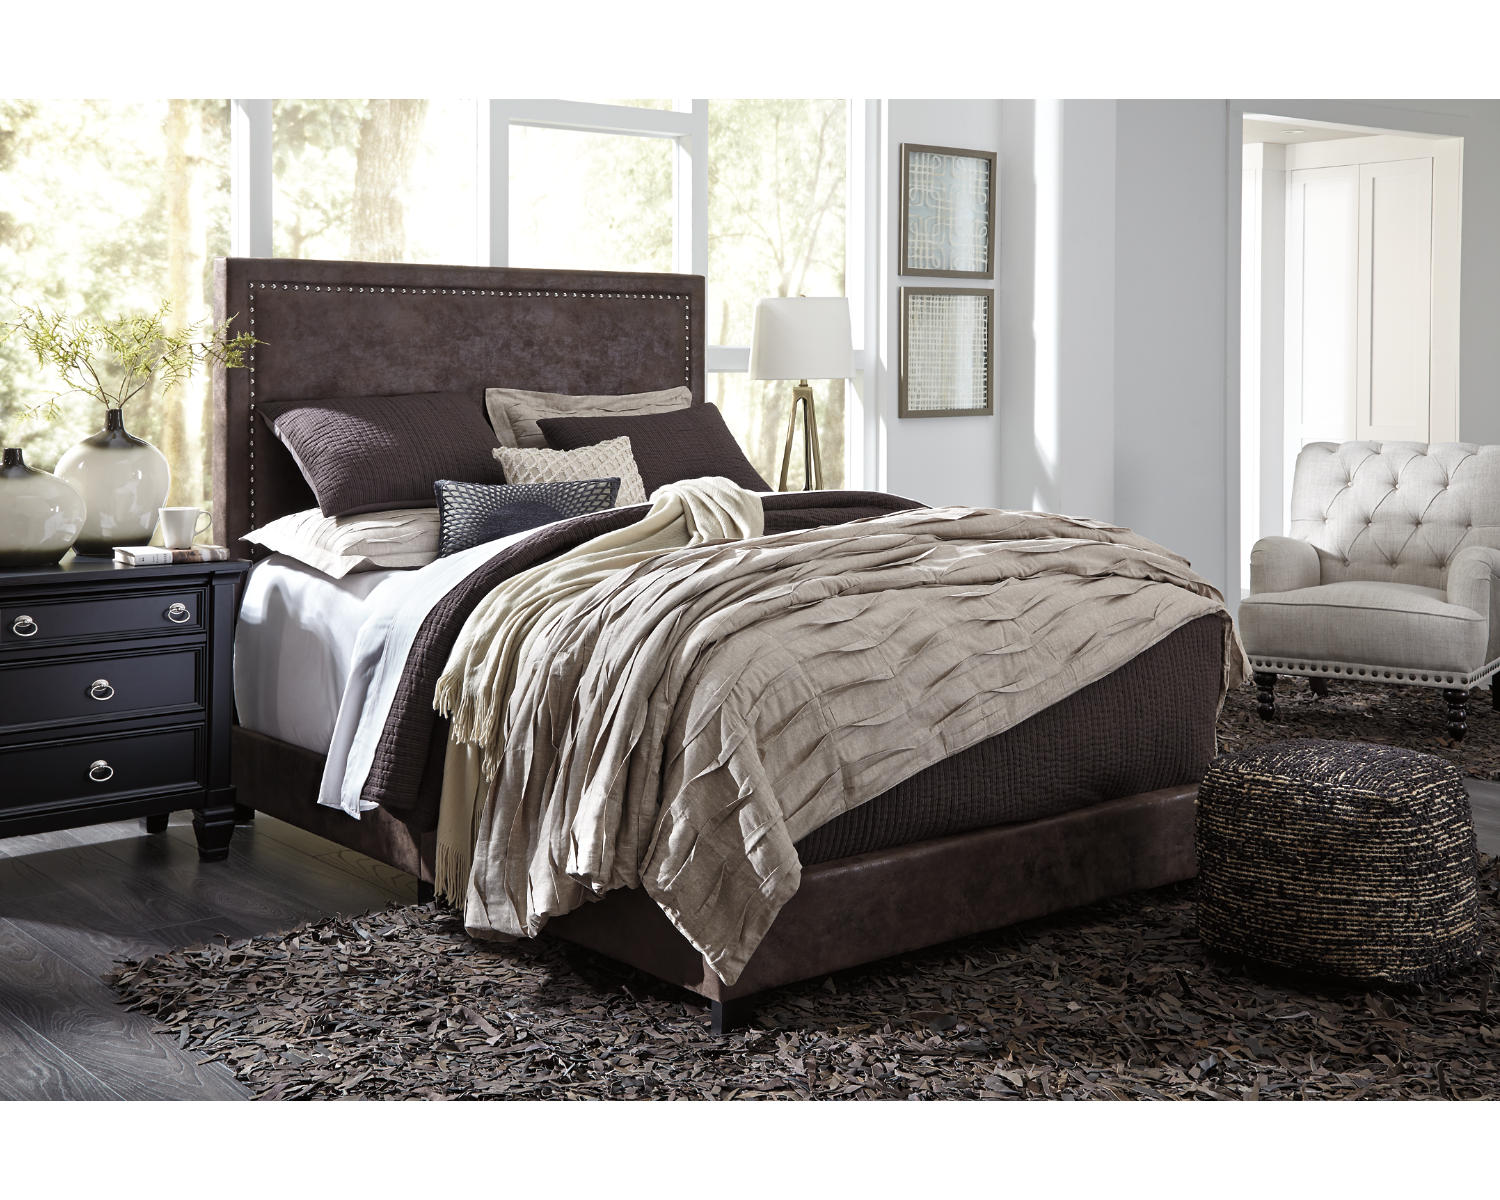 Signature Design by Ashley Dolante Contemporary Faux Leather Upholstered Platform Bed, Queen, Brown - image 5 of 8